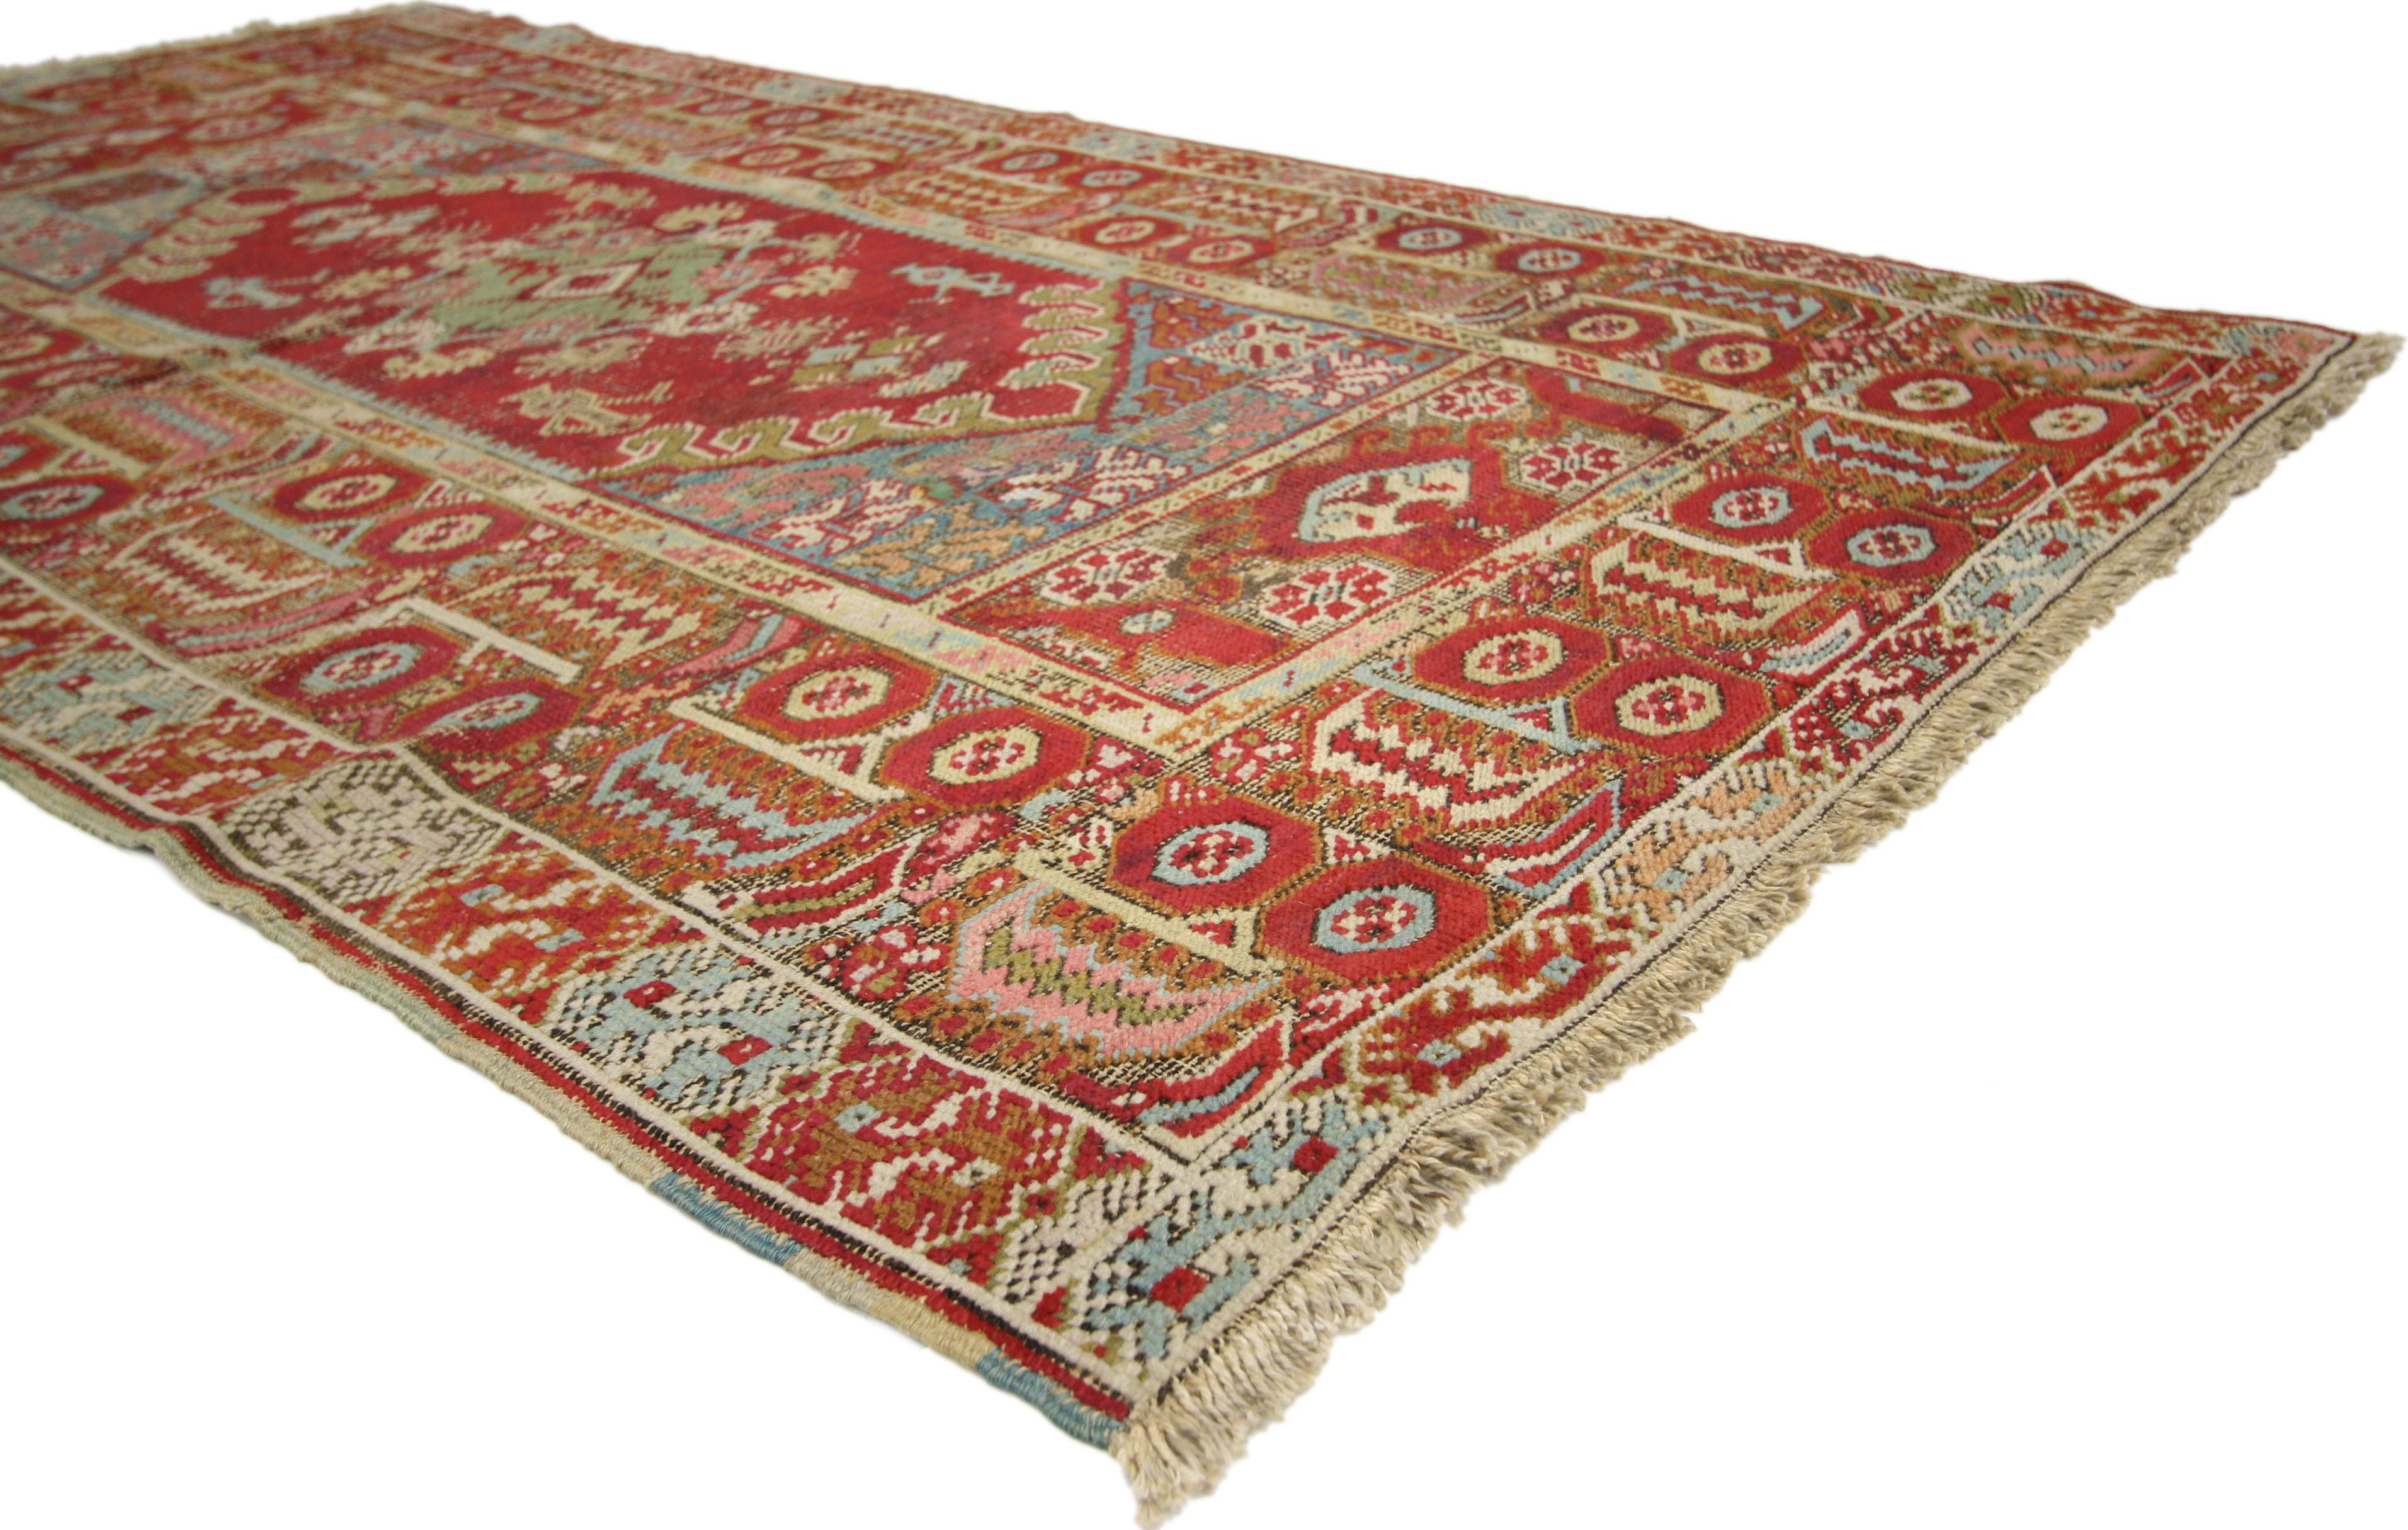 51339 Distressed Vintage Turkish Oushak Accent Rug with Industrial Tribal Style. This hand knotted wool distressed vintage Turkish Oushak accent rug features a centre medallion with extending blooming botehs dotted with jugs, lozenges, and organic